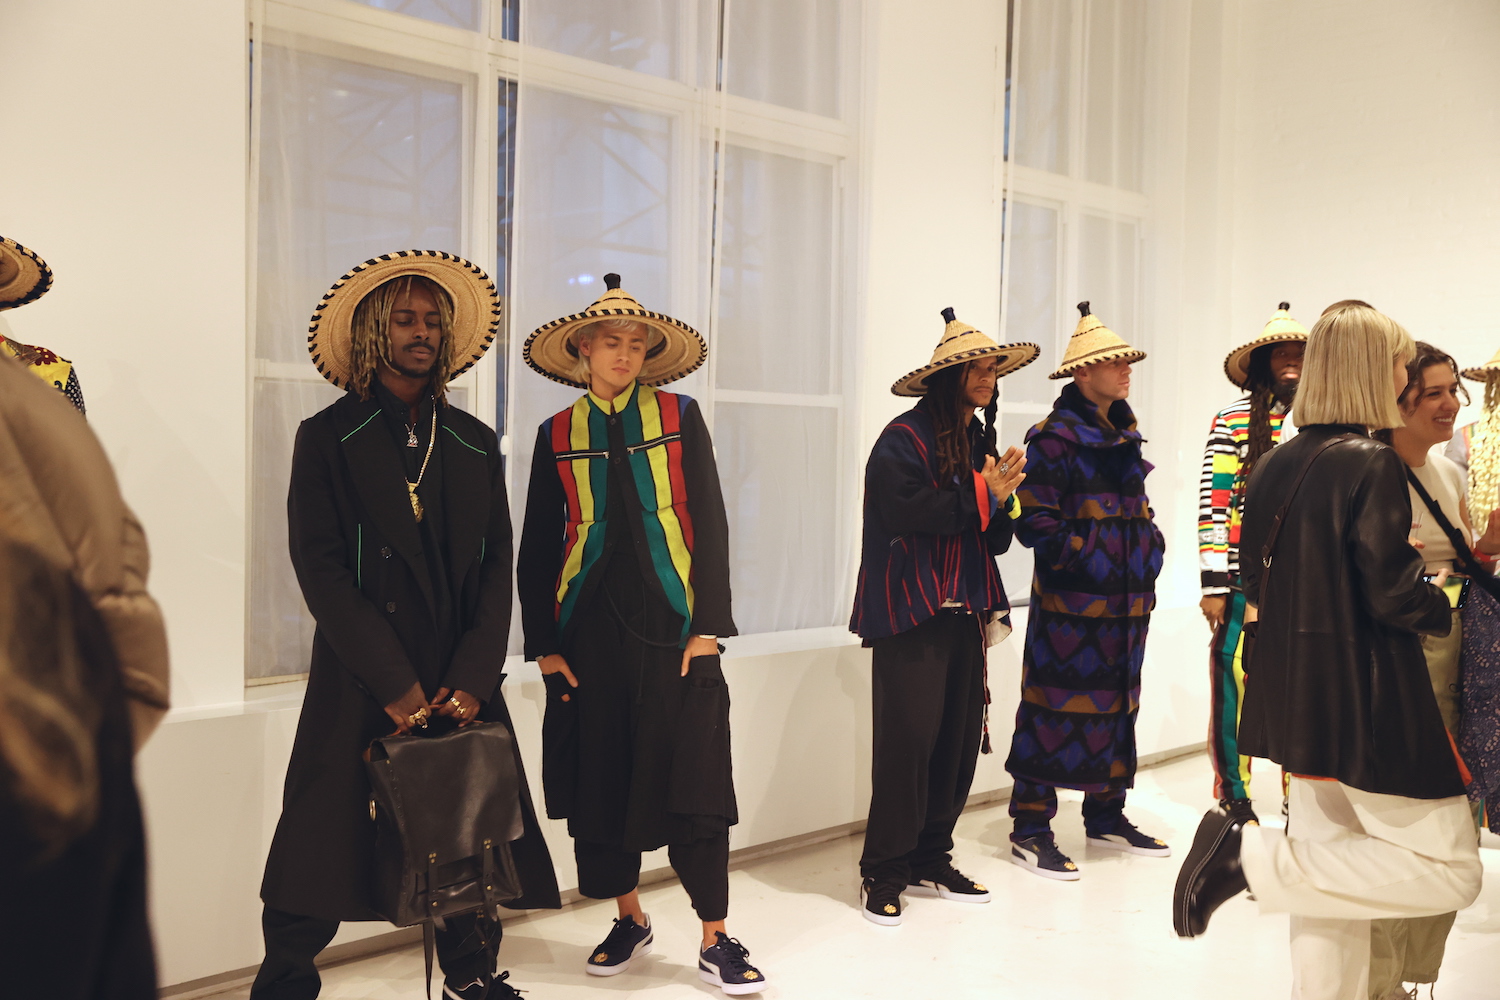 A group of people standing inside a white studio space. Several models wearing straw hats and brightly-colored outfits.